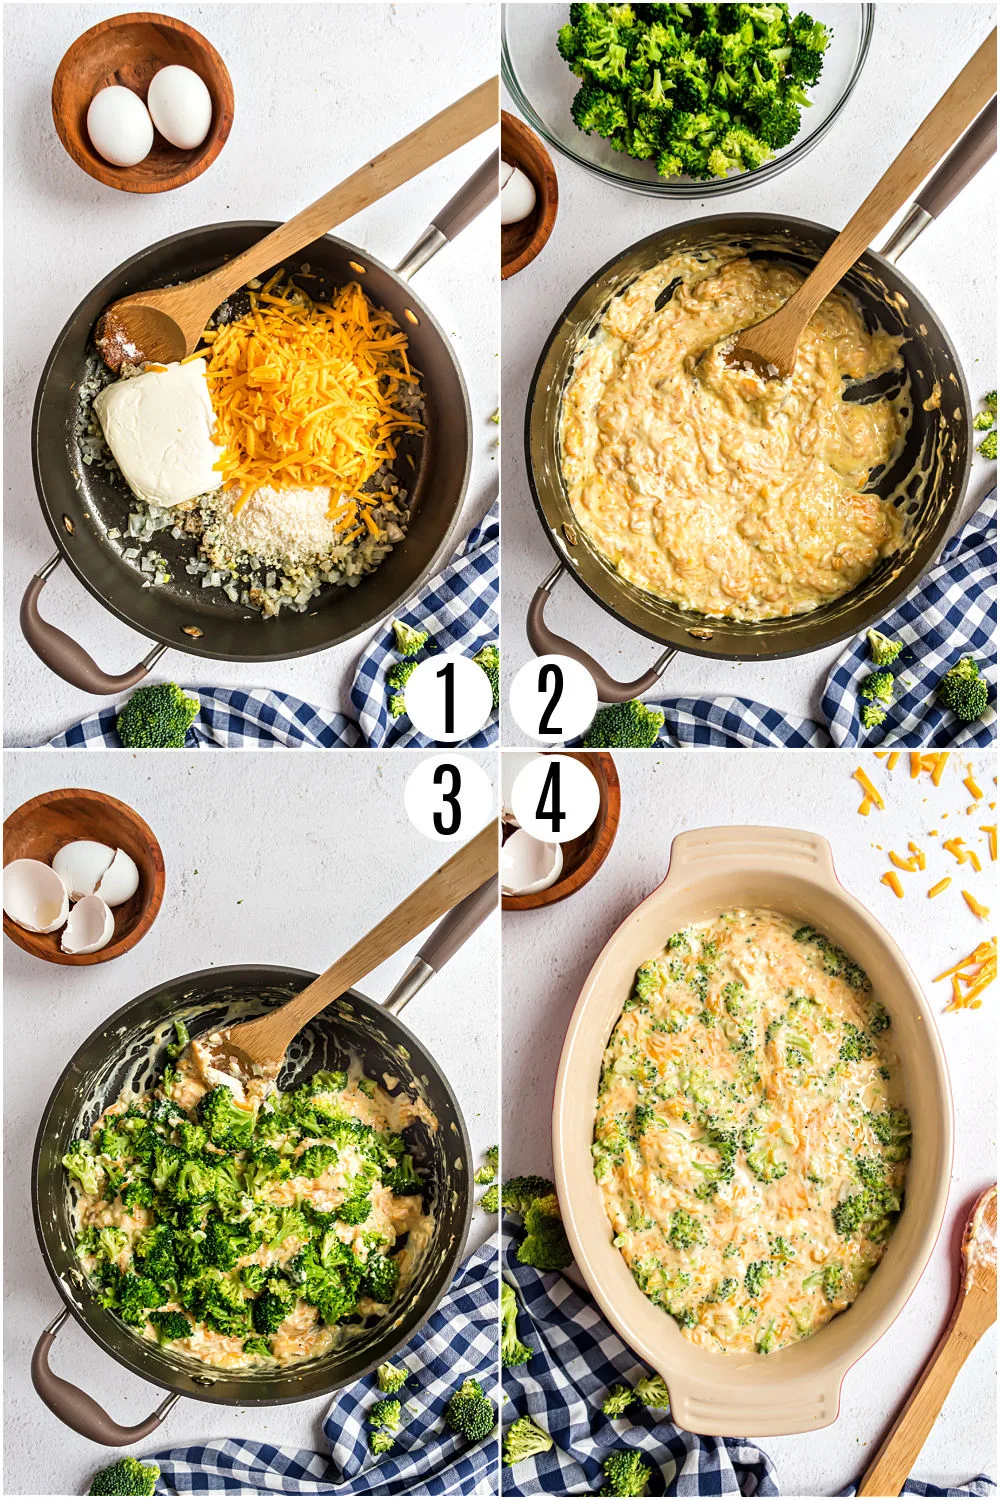 Step by step photos showing how to make broccoli cheese casserole.